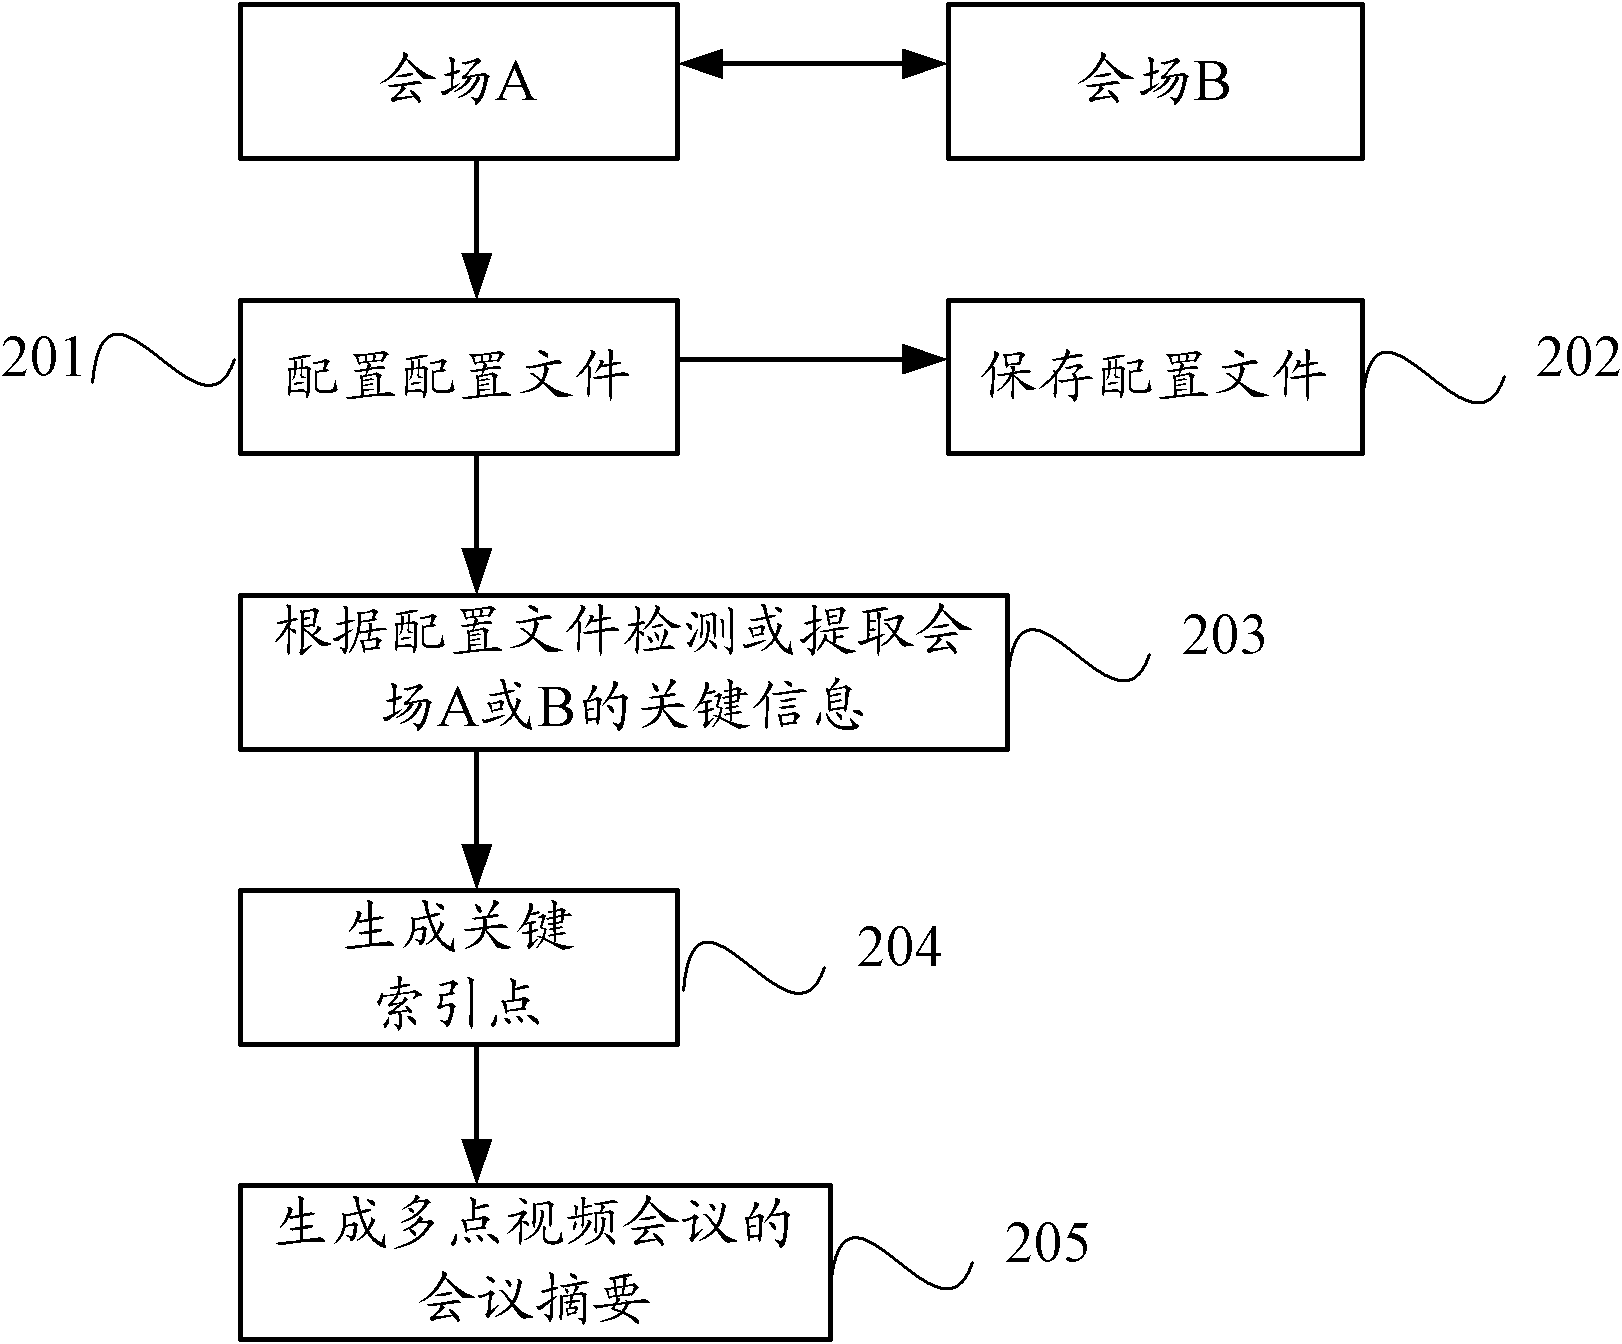 Conference recording method and conference system